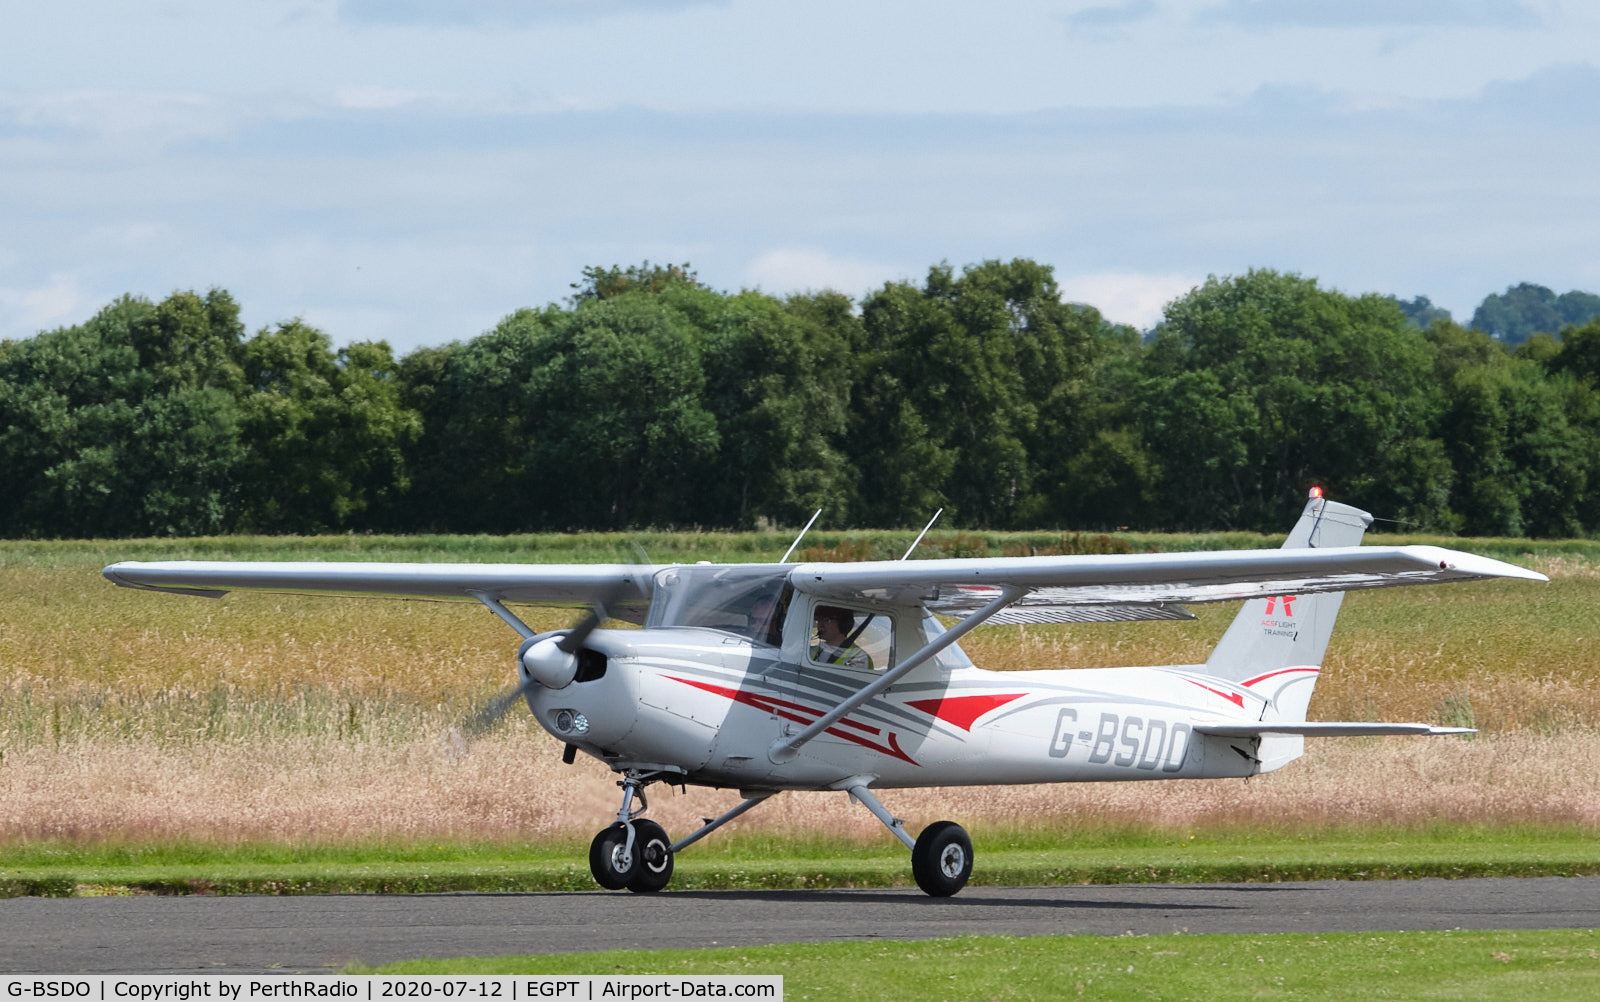 G-BSDO, 1978 Cessna 152 C/N 152-81657, Taking-off from rw 27